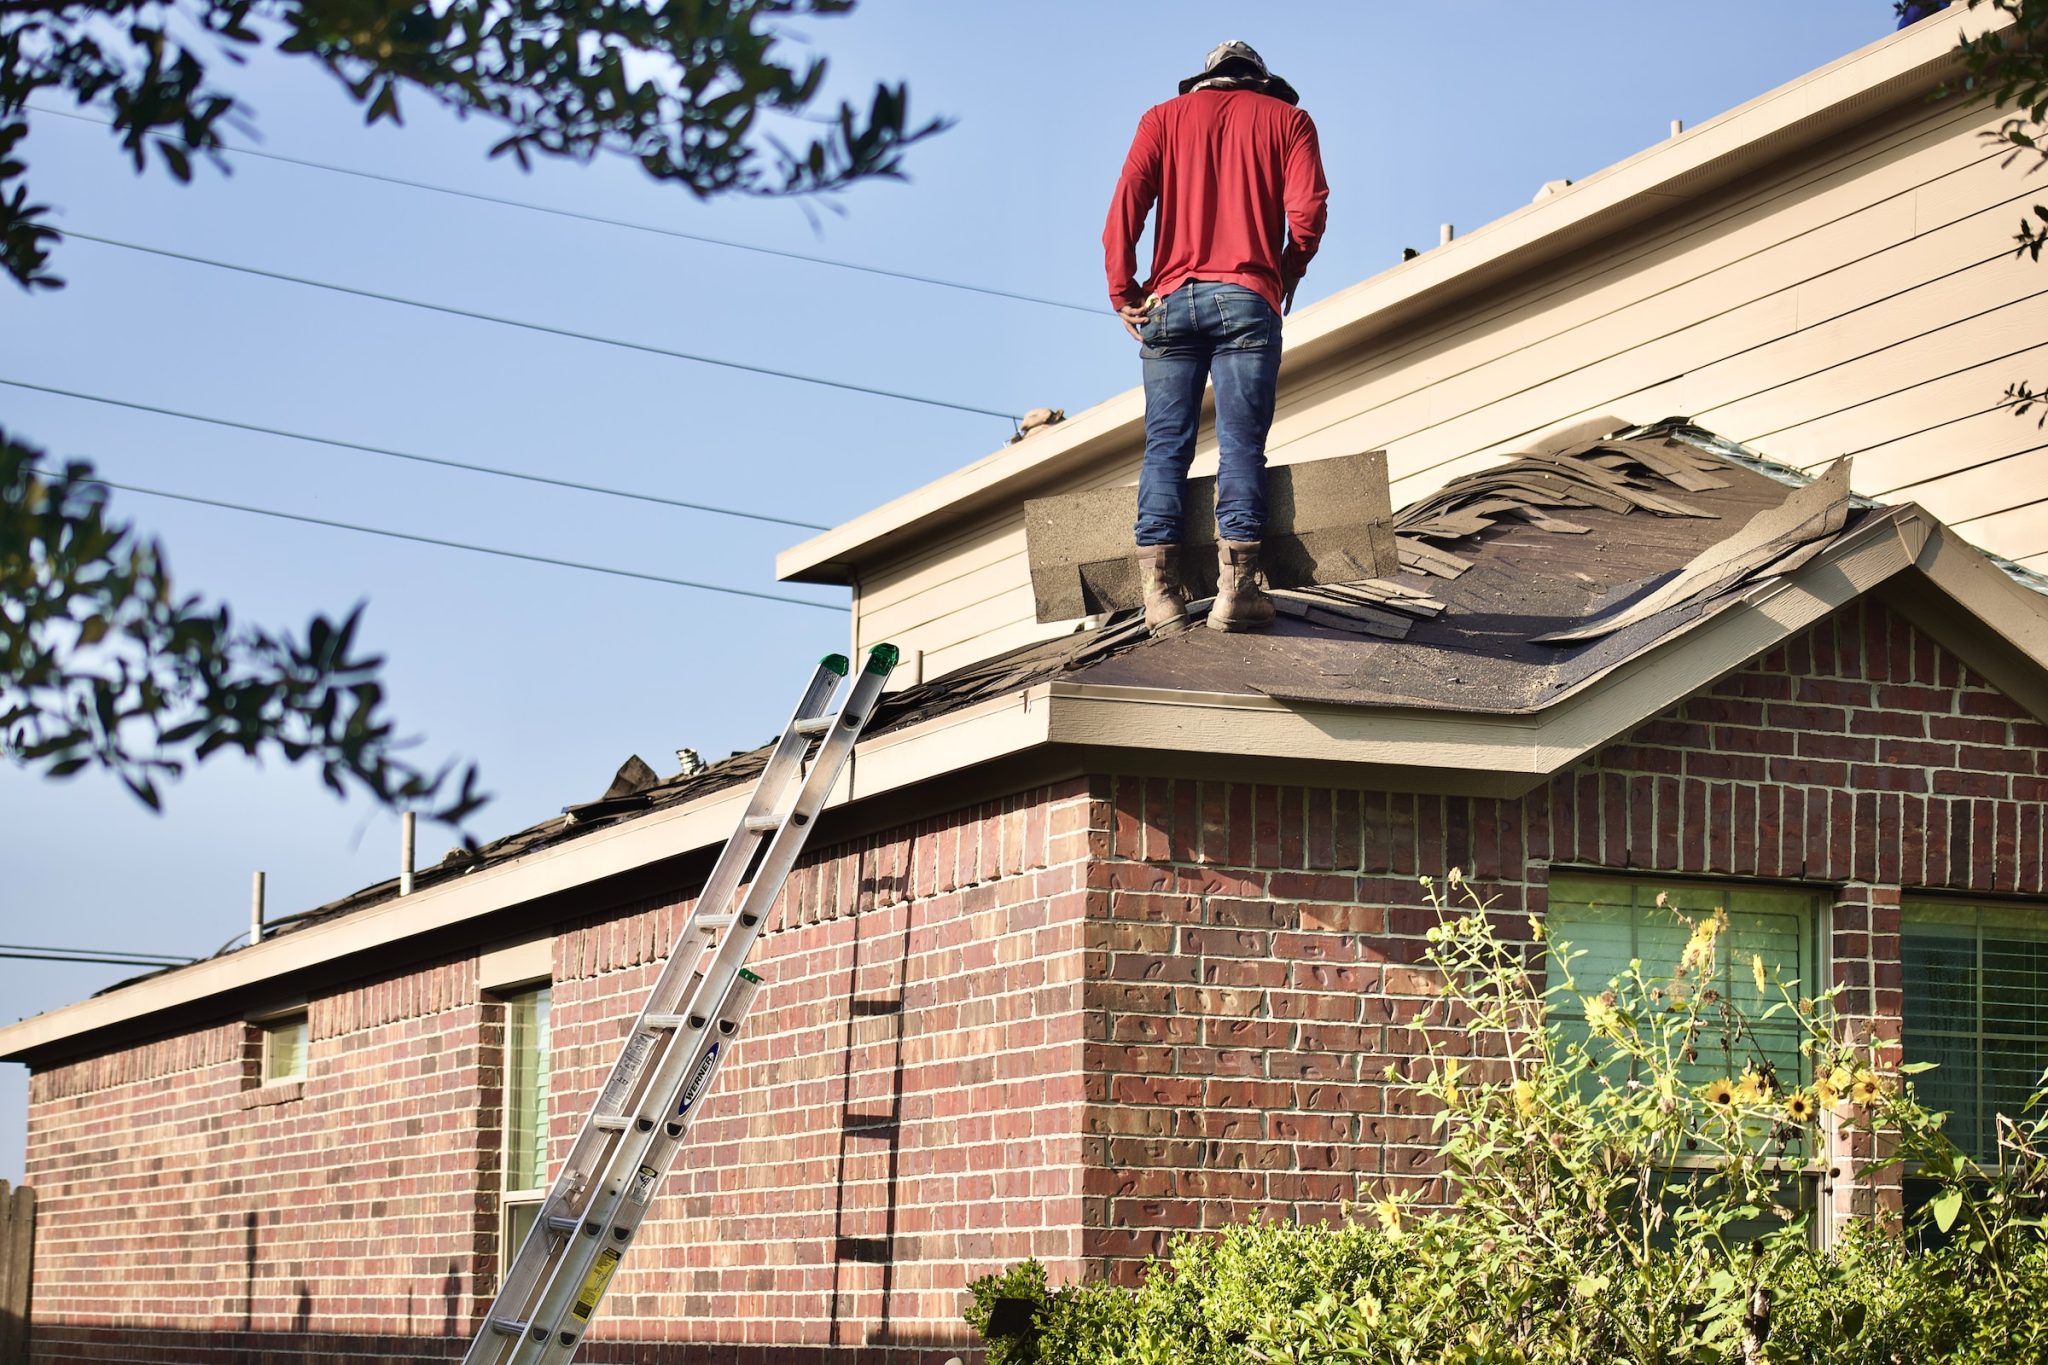 6 things you should avoid when repairing a roof